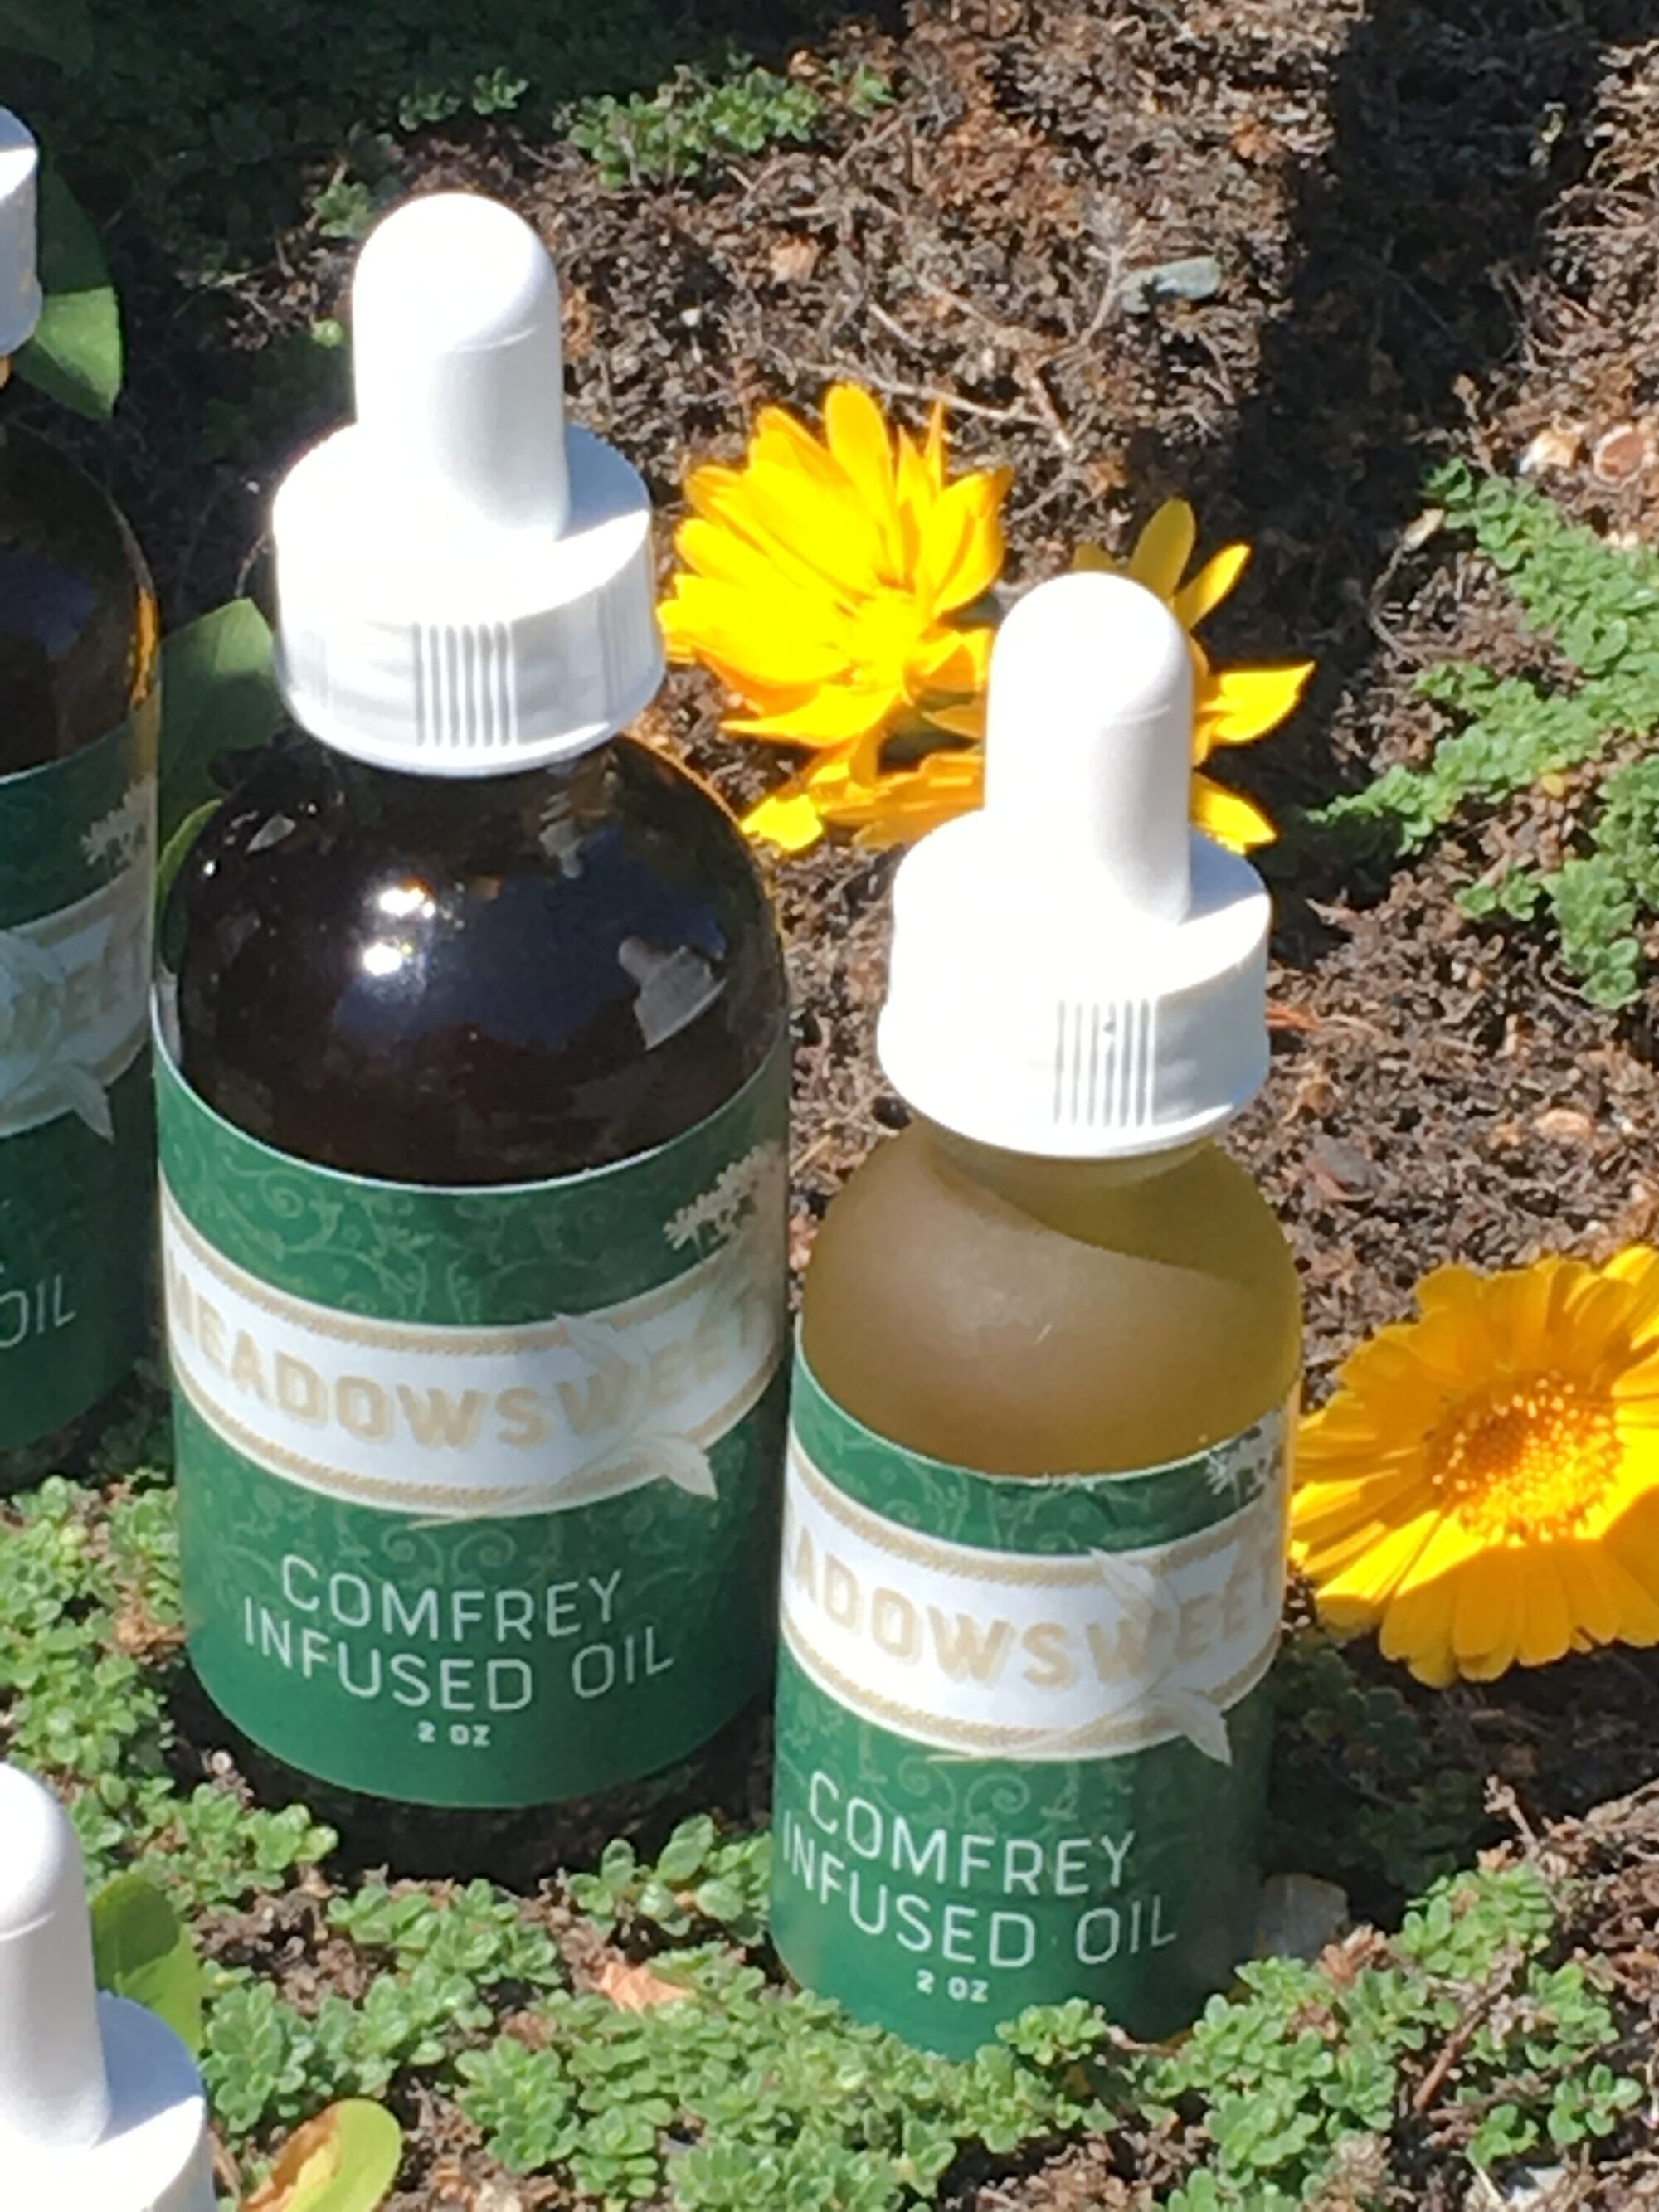 Three bottles of Comfrey Infused Oil